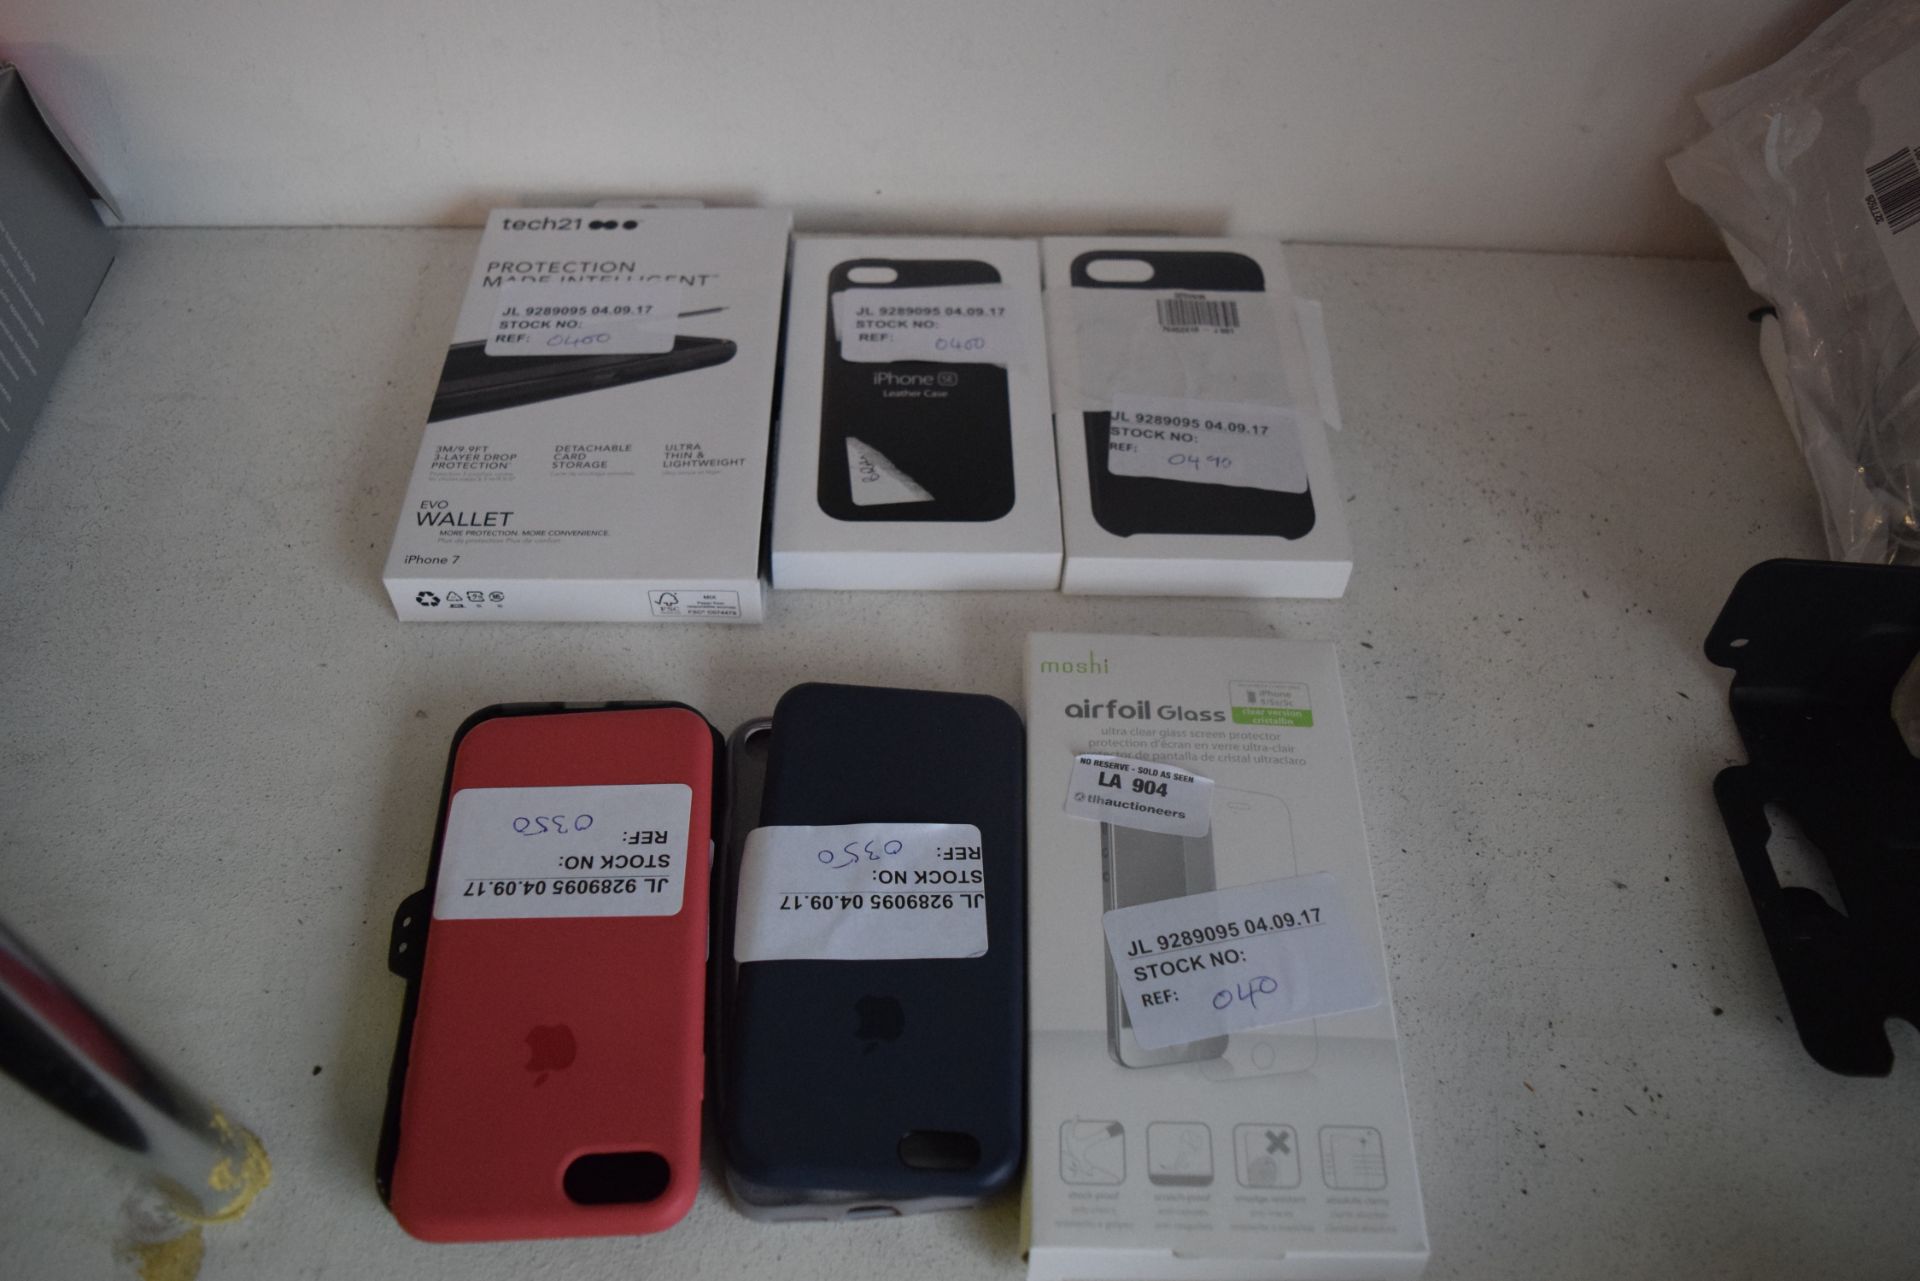 8 x BOXED AND UNBOXED ASSORTED MOBILE PHONE CASES AND SCREEN PROTECTORS RRP £5 - £40 EACH 04/09/